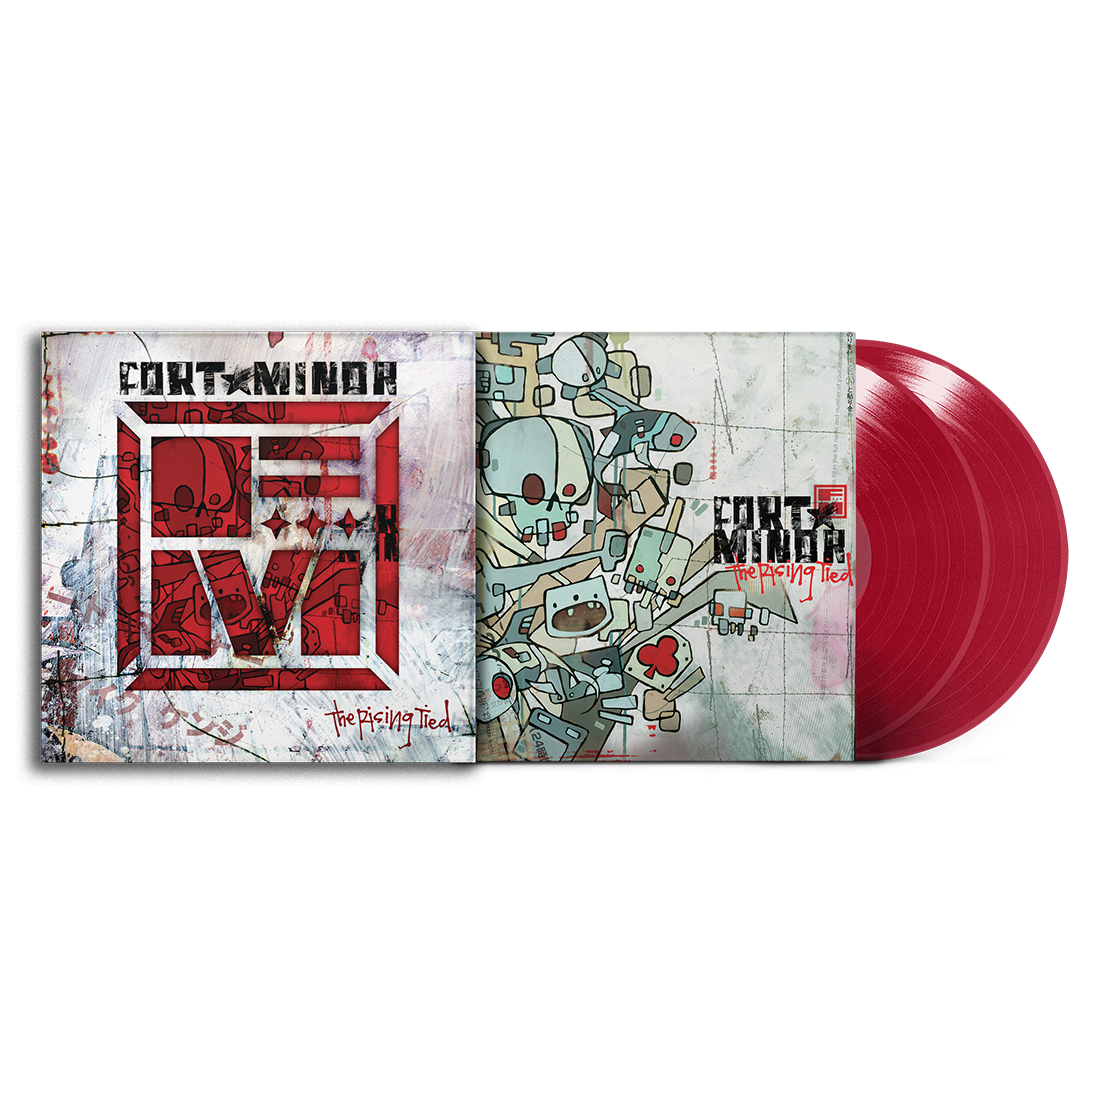 Fort Minor - The Rising Tied (Deluxe Edition): Apple Red Vinyl 2LP